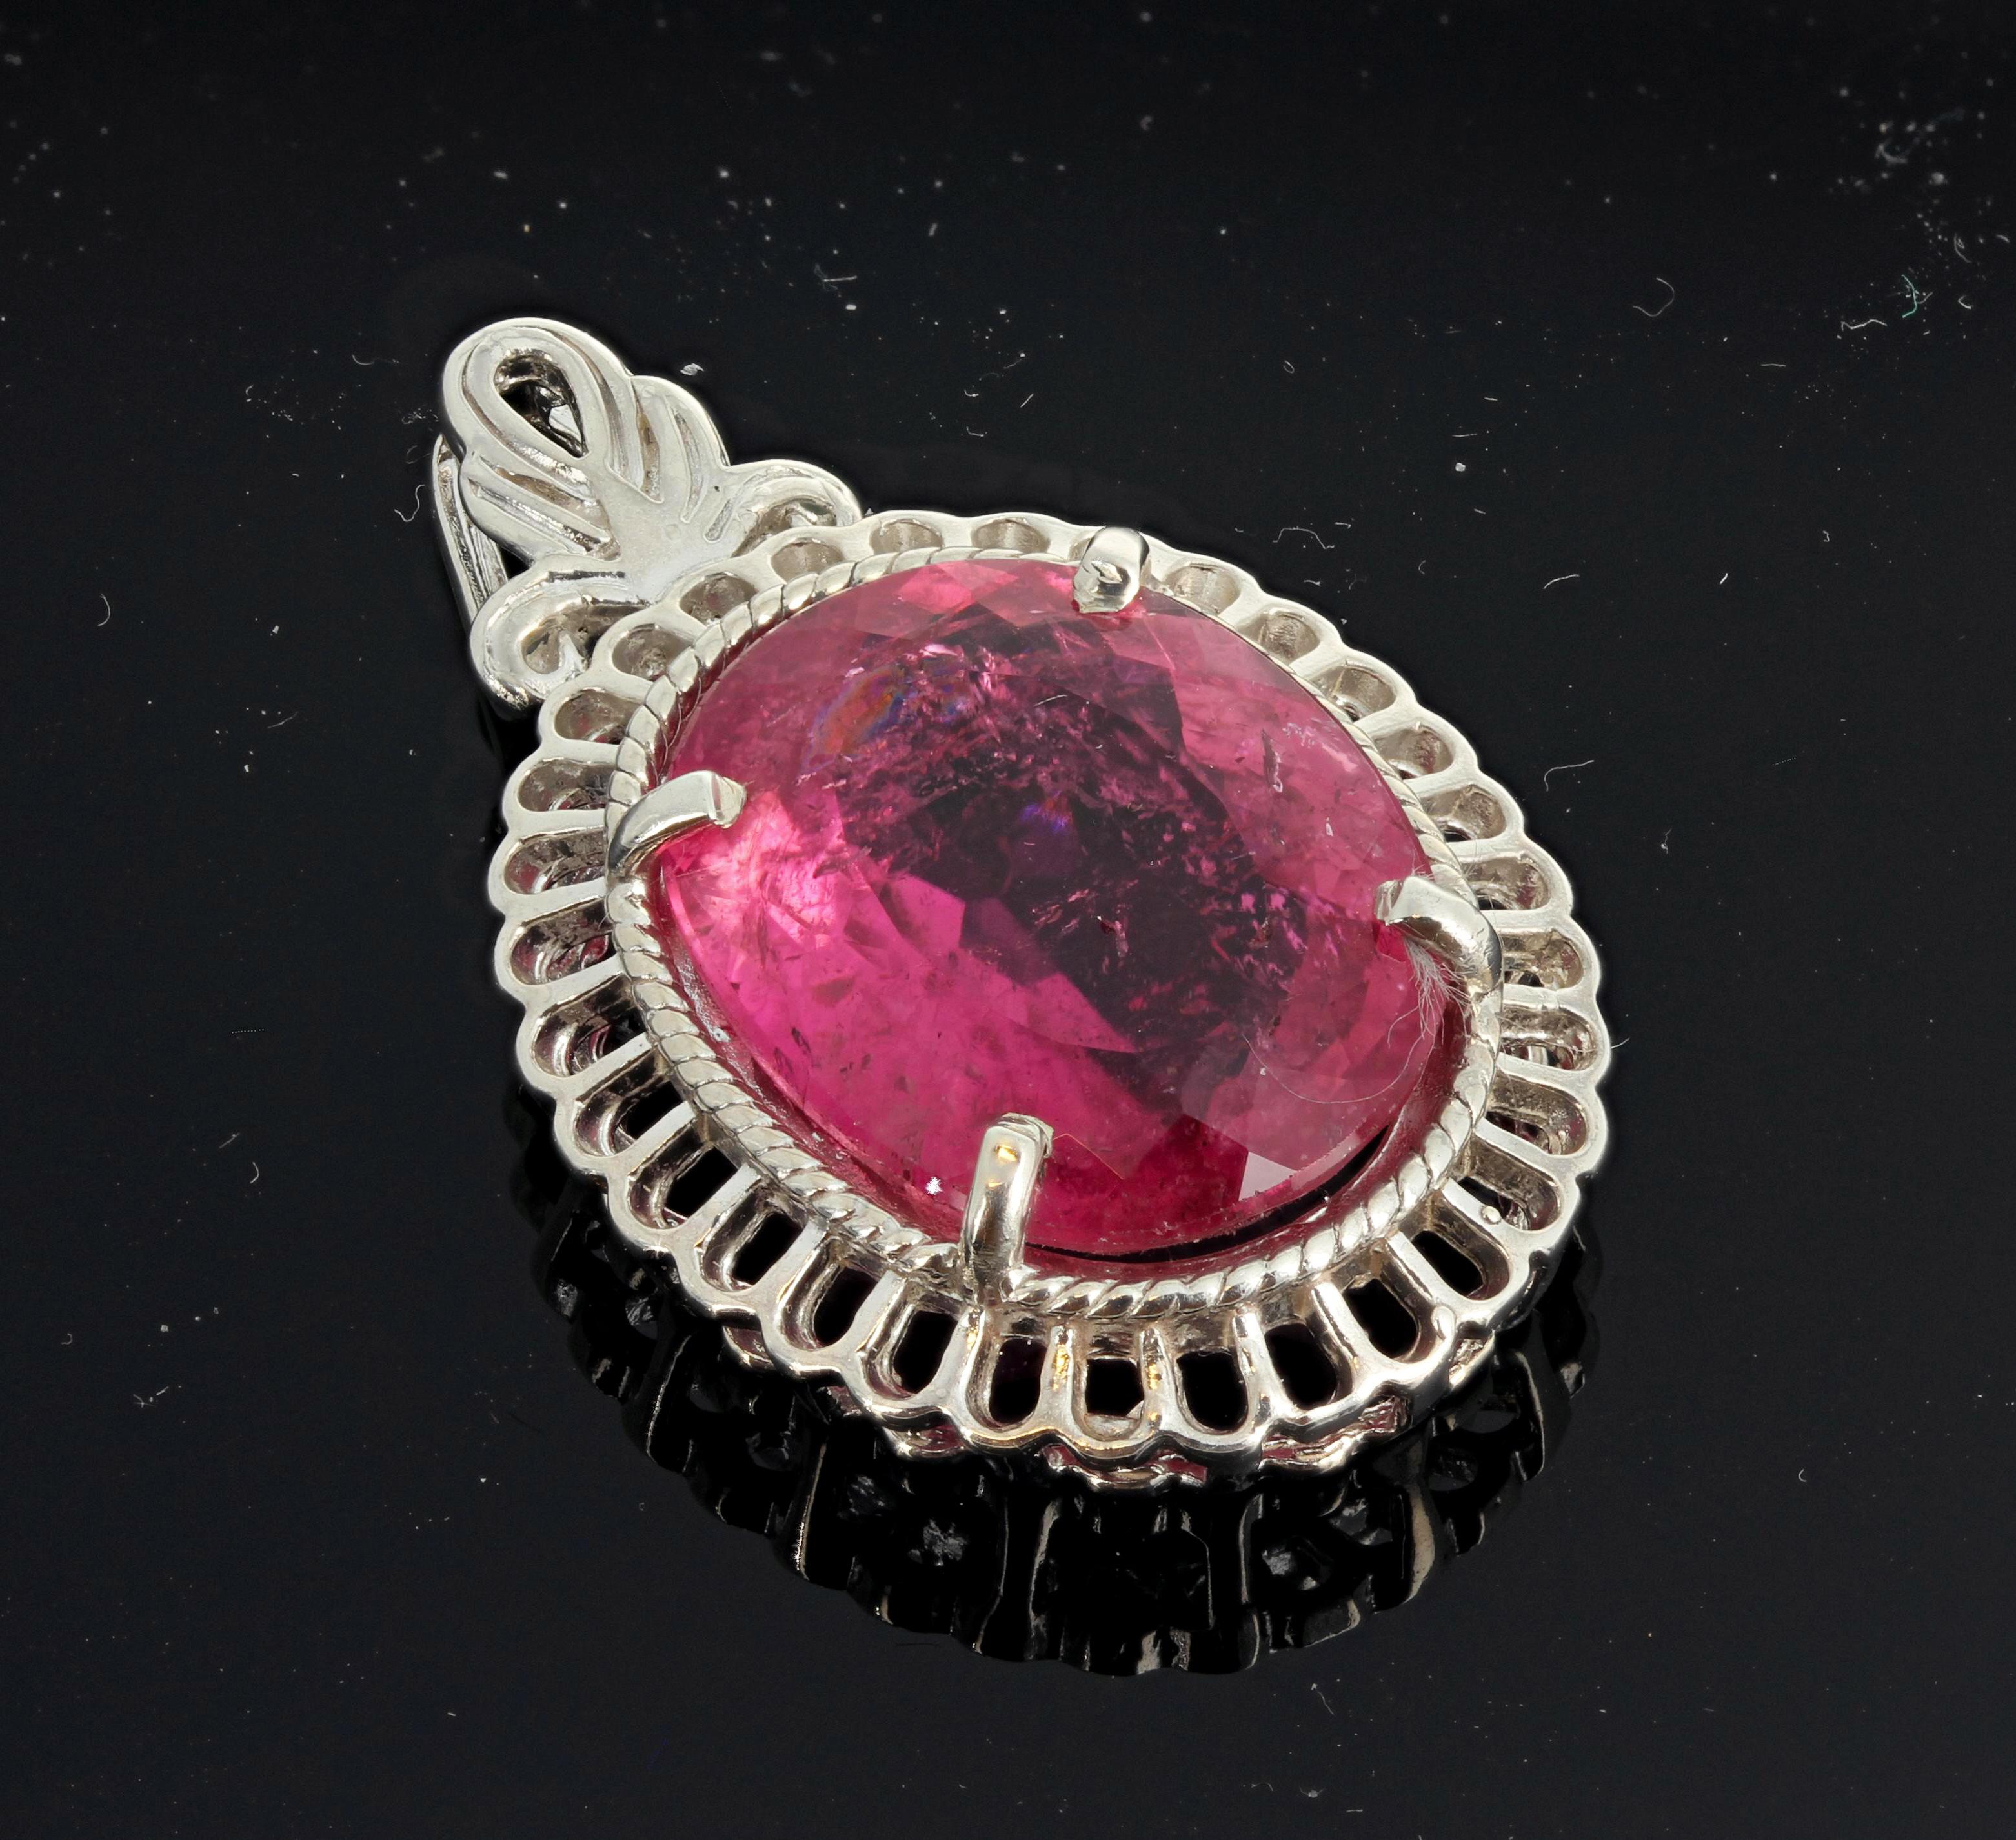 Brilliant glittering huge unusually large unique natural 15 carat pinky with reddish tones oval Tourmaline (18.2 mm x 14.4 mm) set in a sterling silver pendant.  This is approximately 1.35 inches long and came from the famous tourmaline mine in